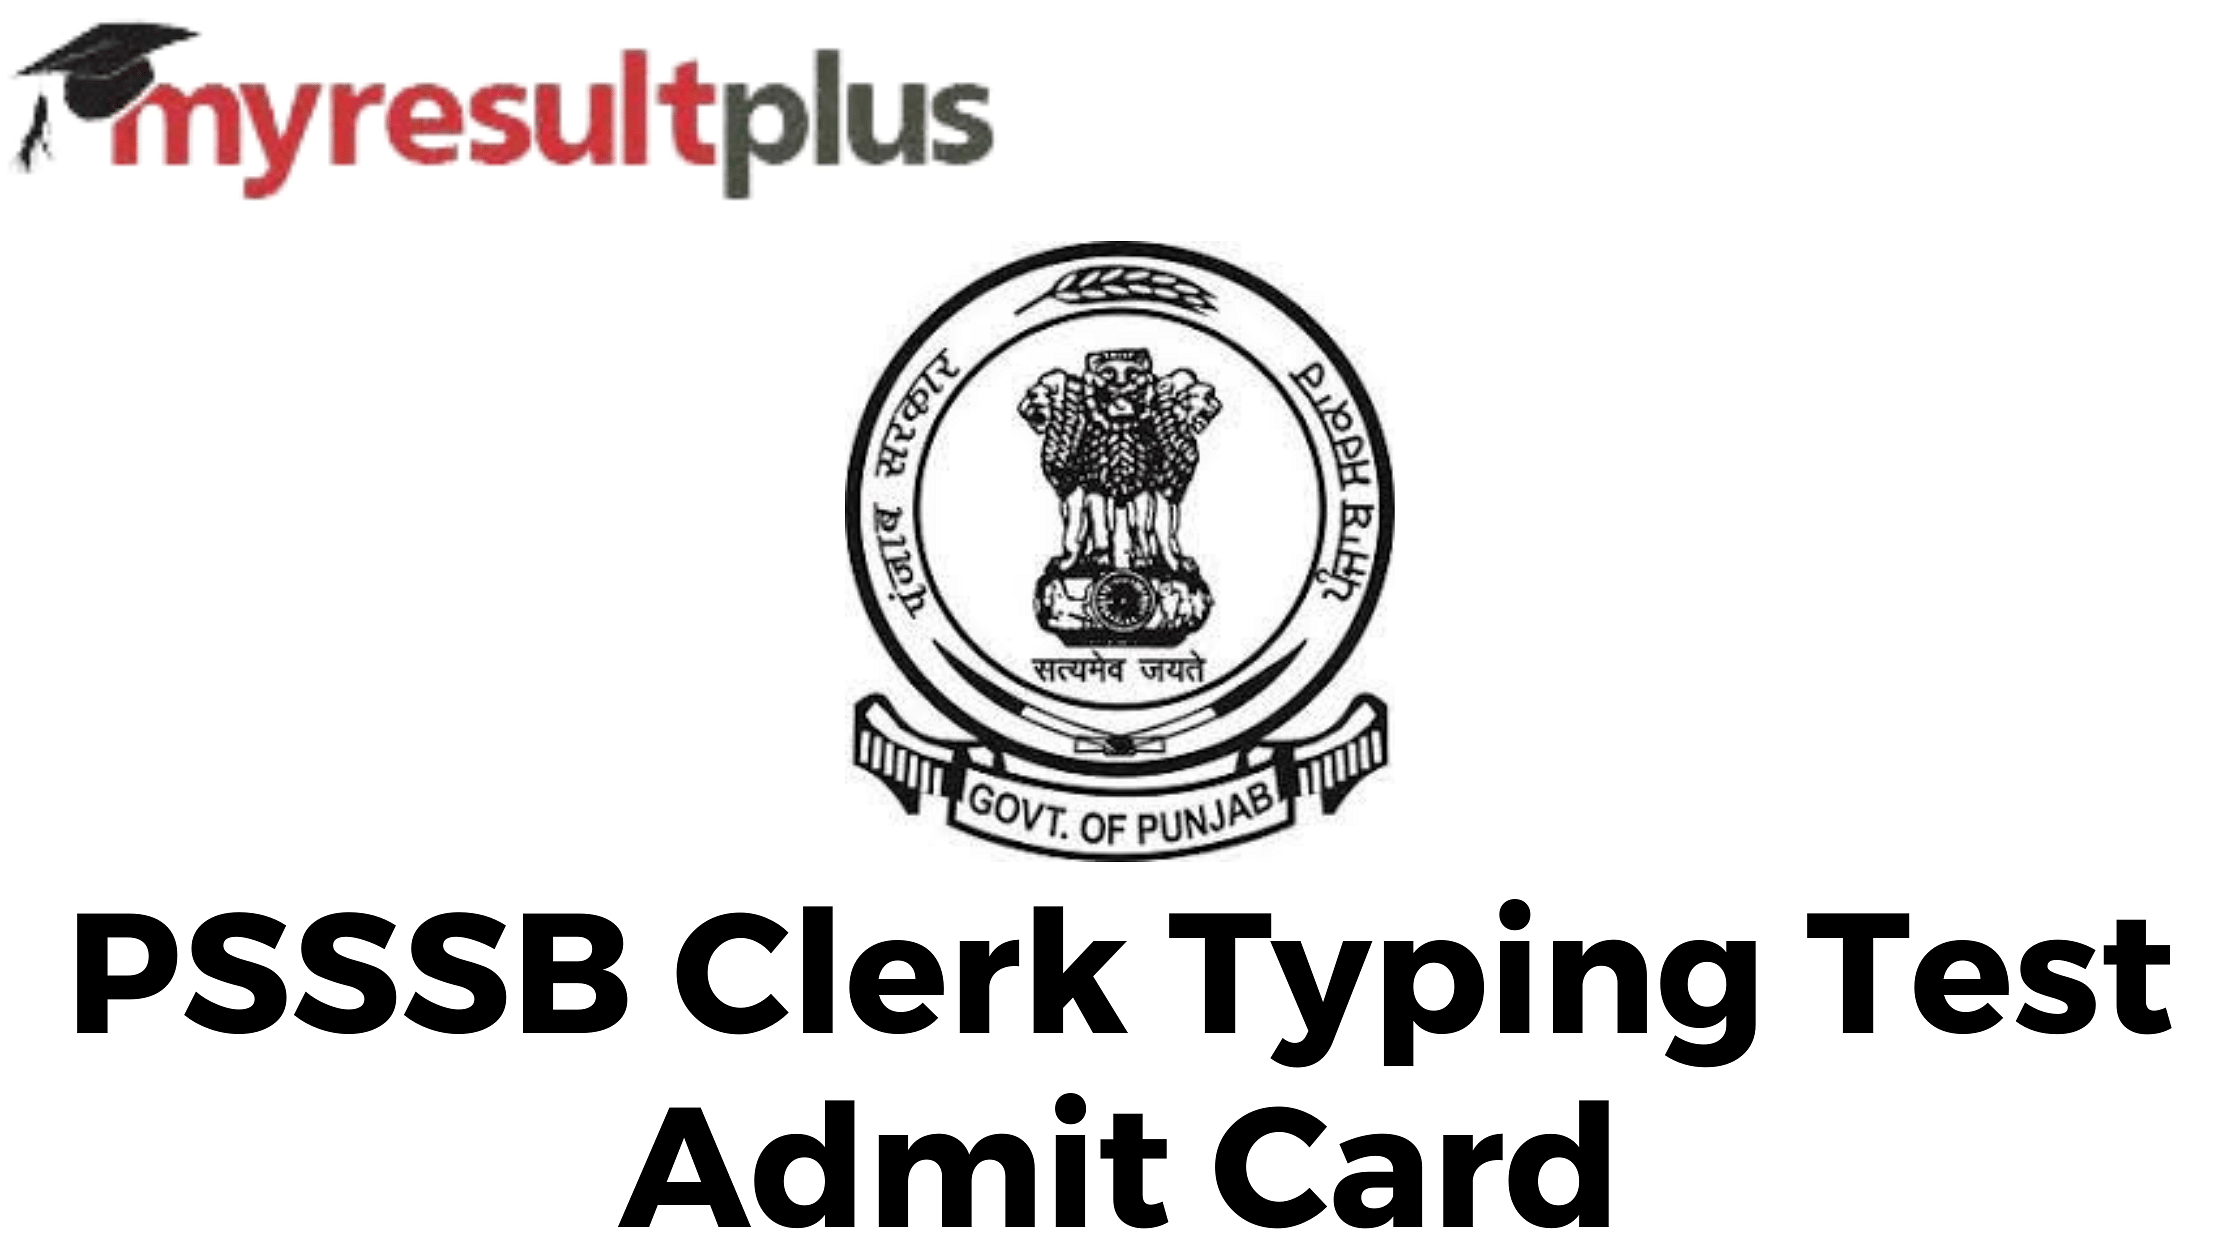 PSSSB Clerk Typing Test Admit Card Out, Here's Direct Link to Download